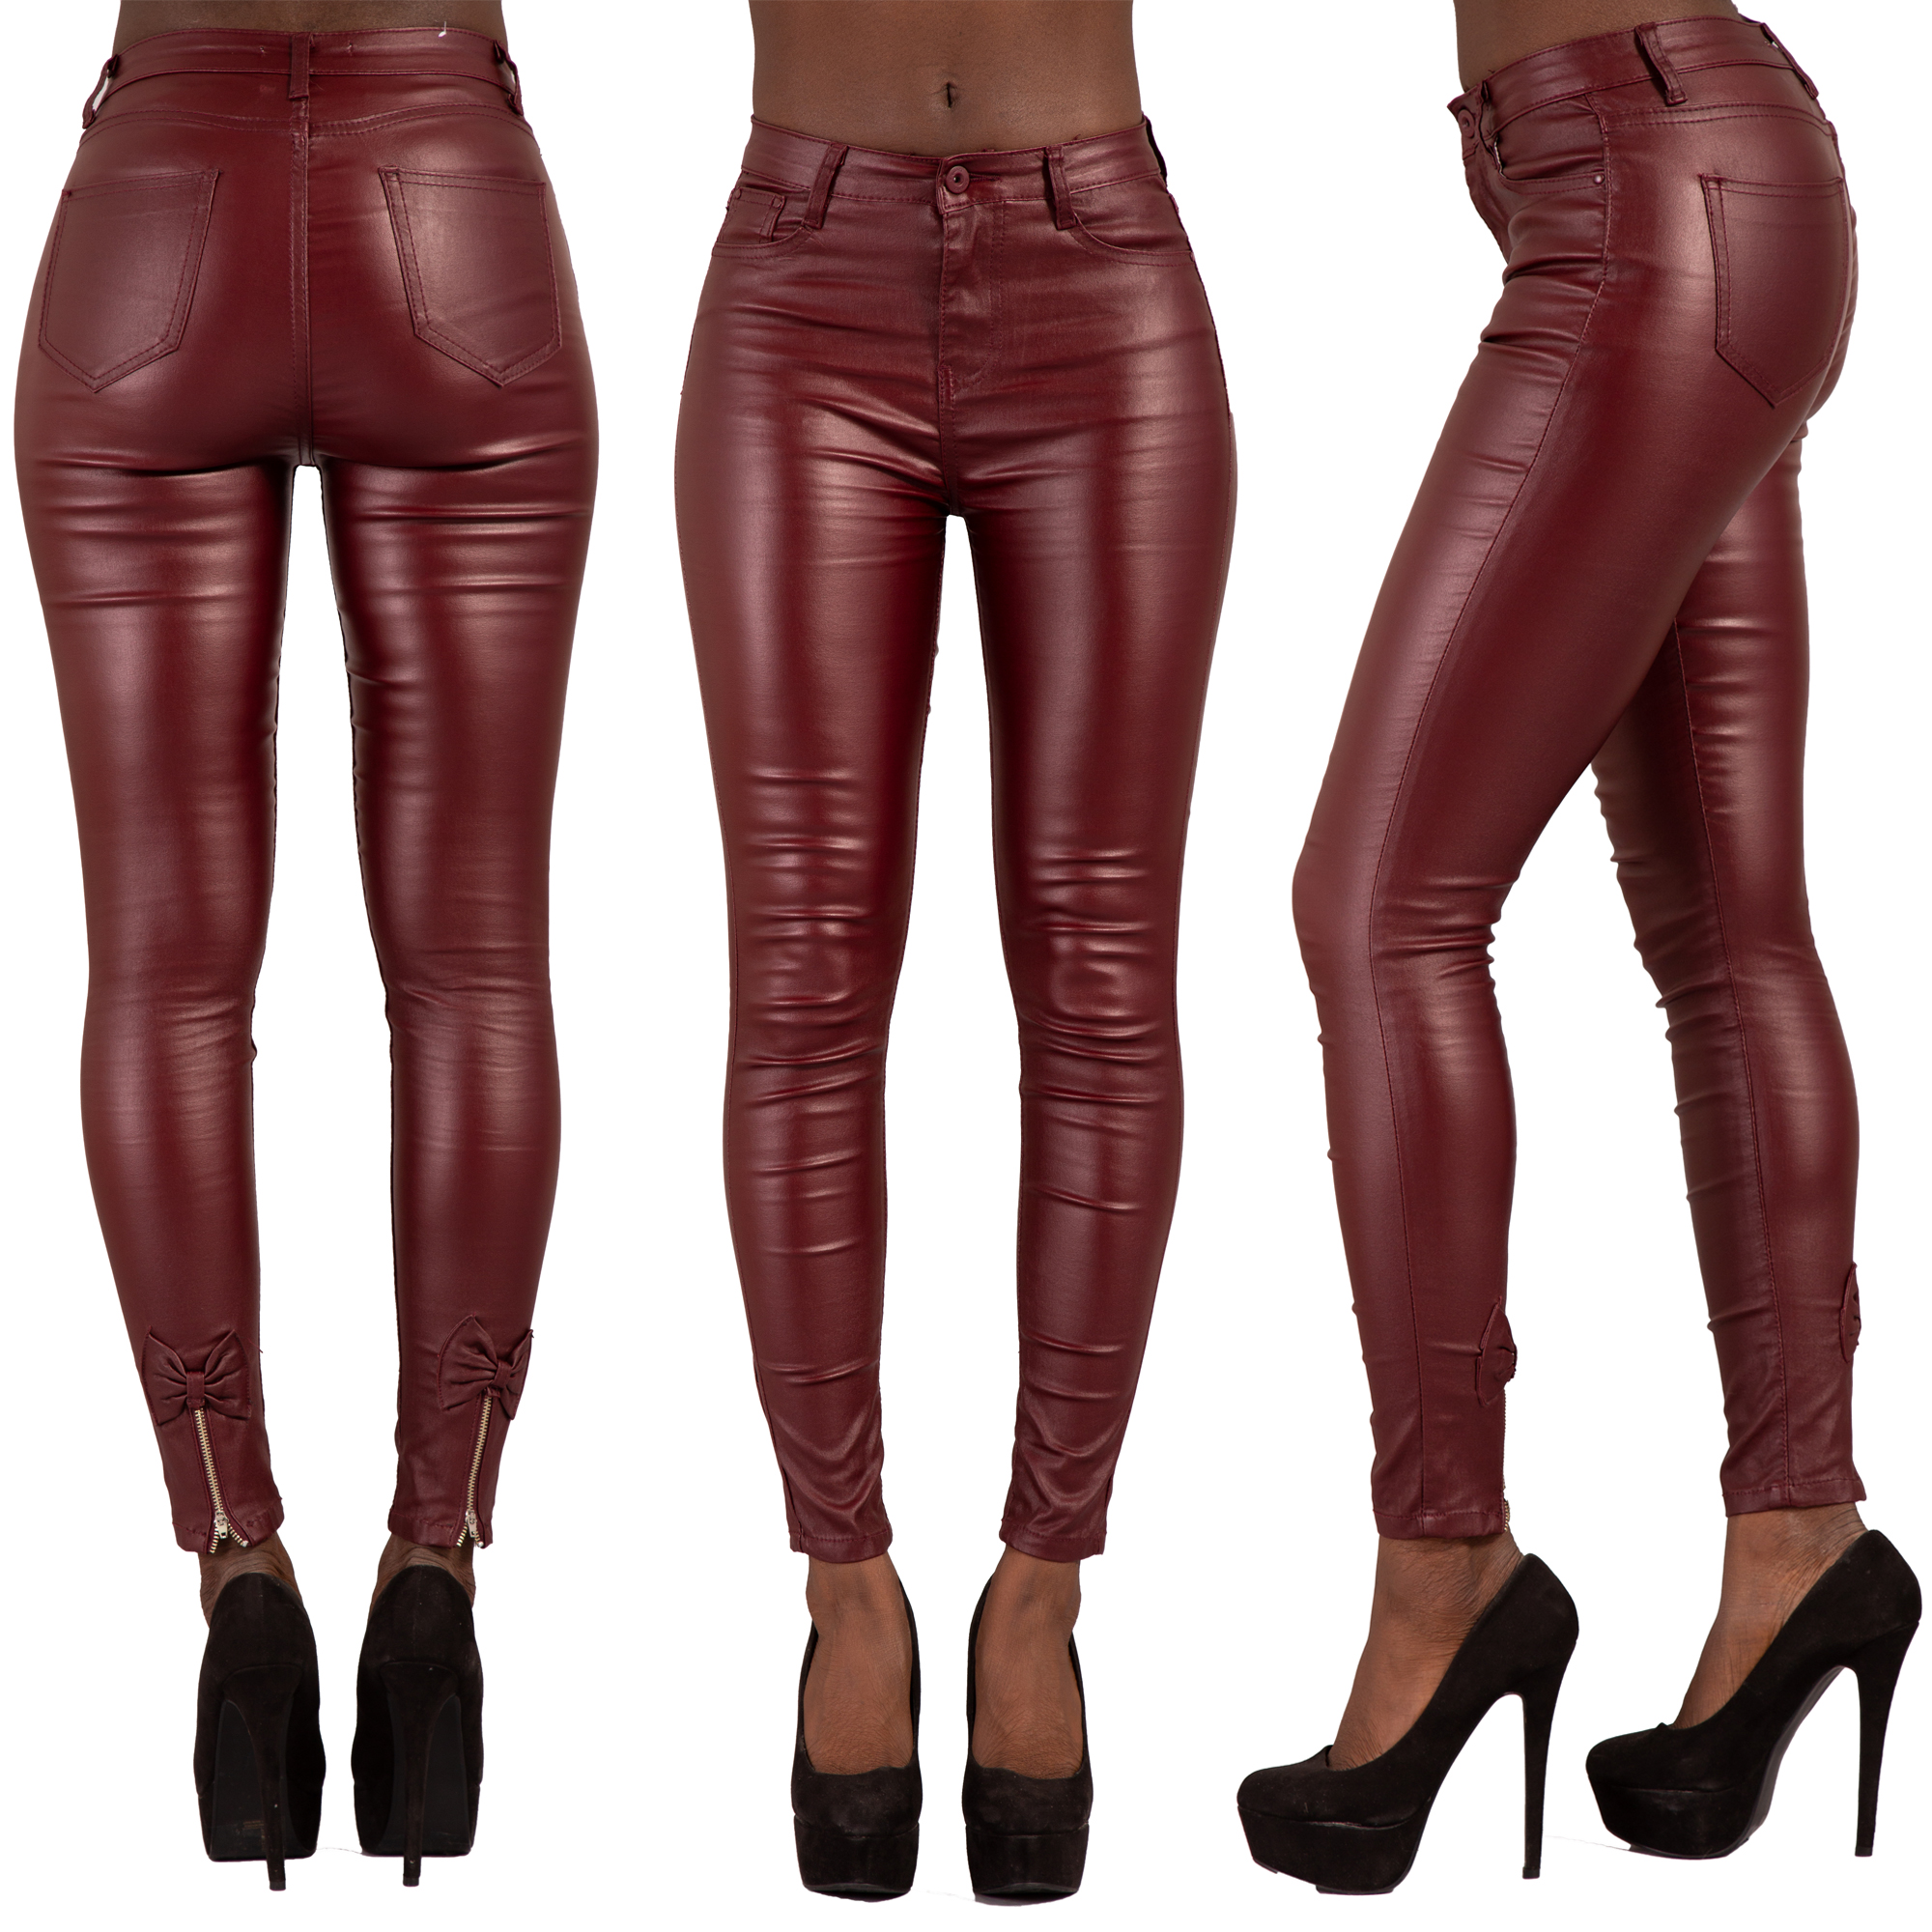 burgundy leather trousers